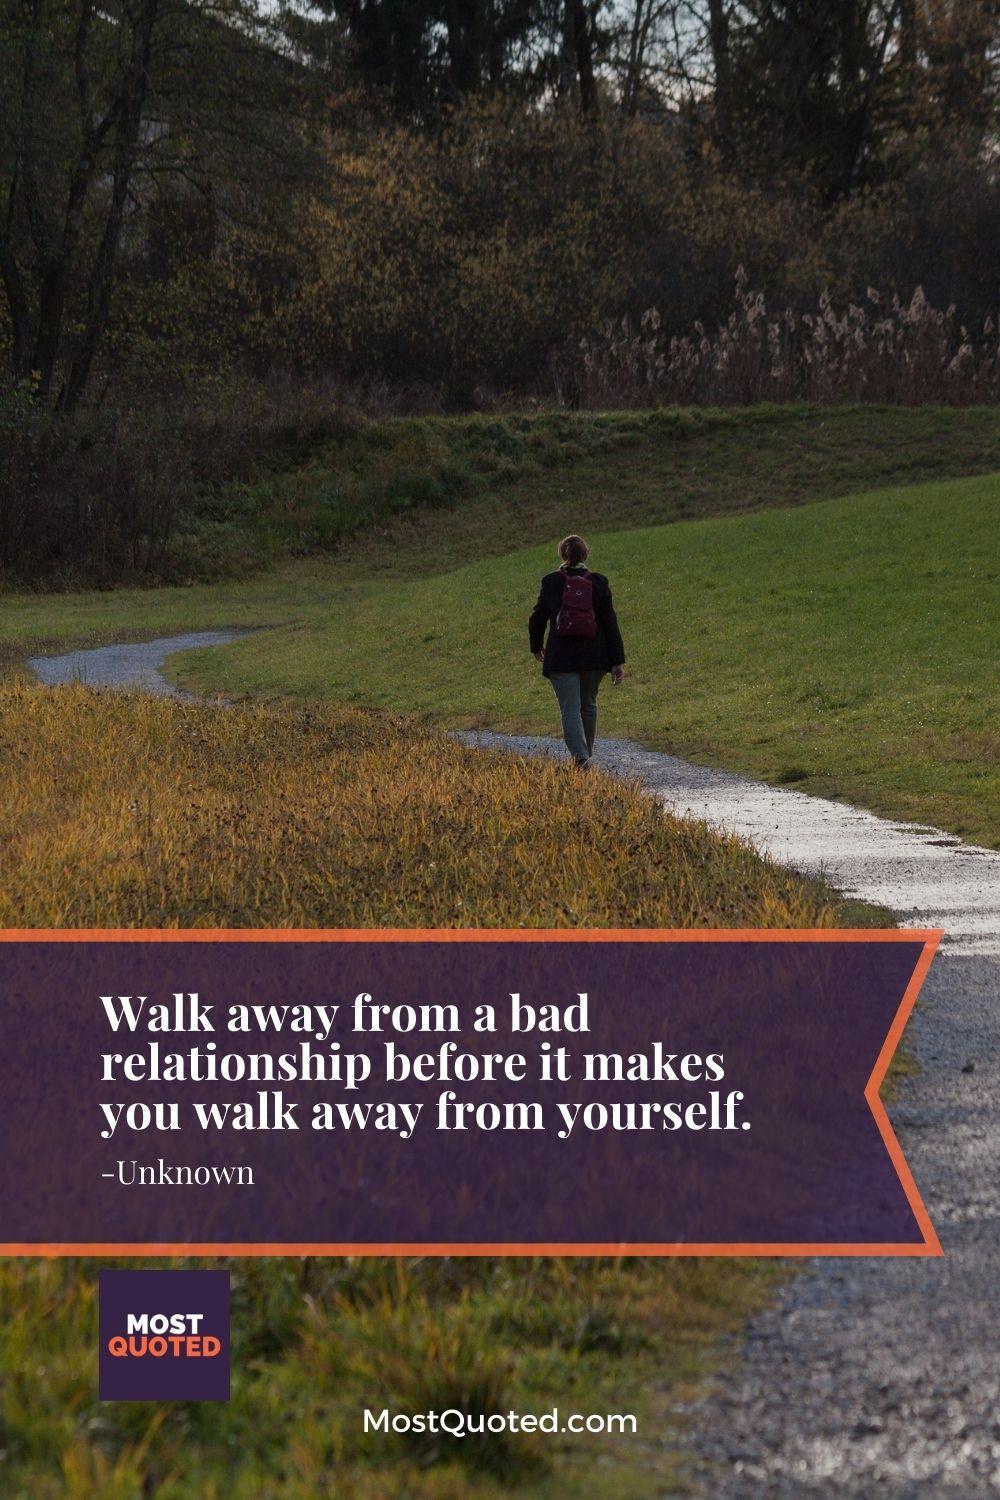 Walk away from a bad relationship before it makes you walk away from yourself.